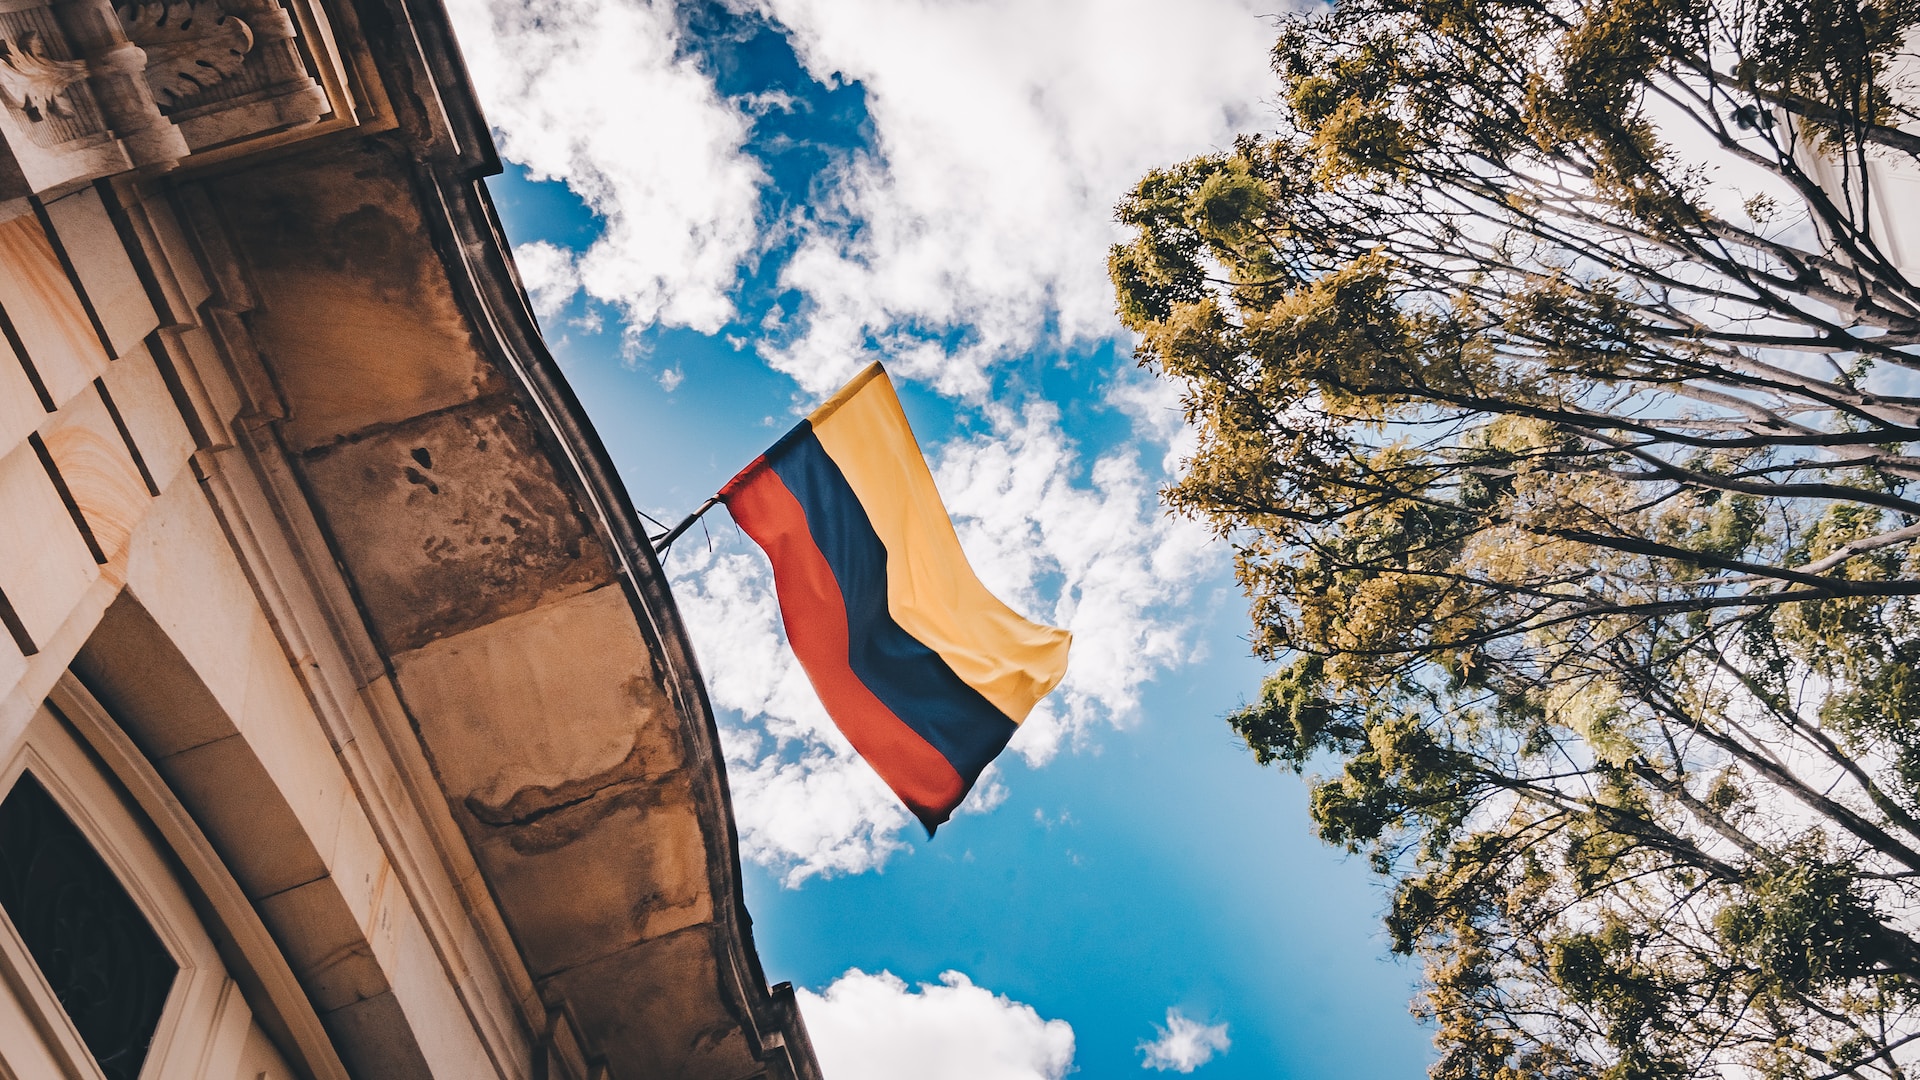 The Colombian flag on a building